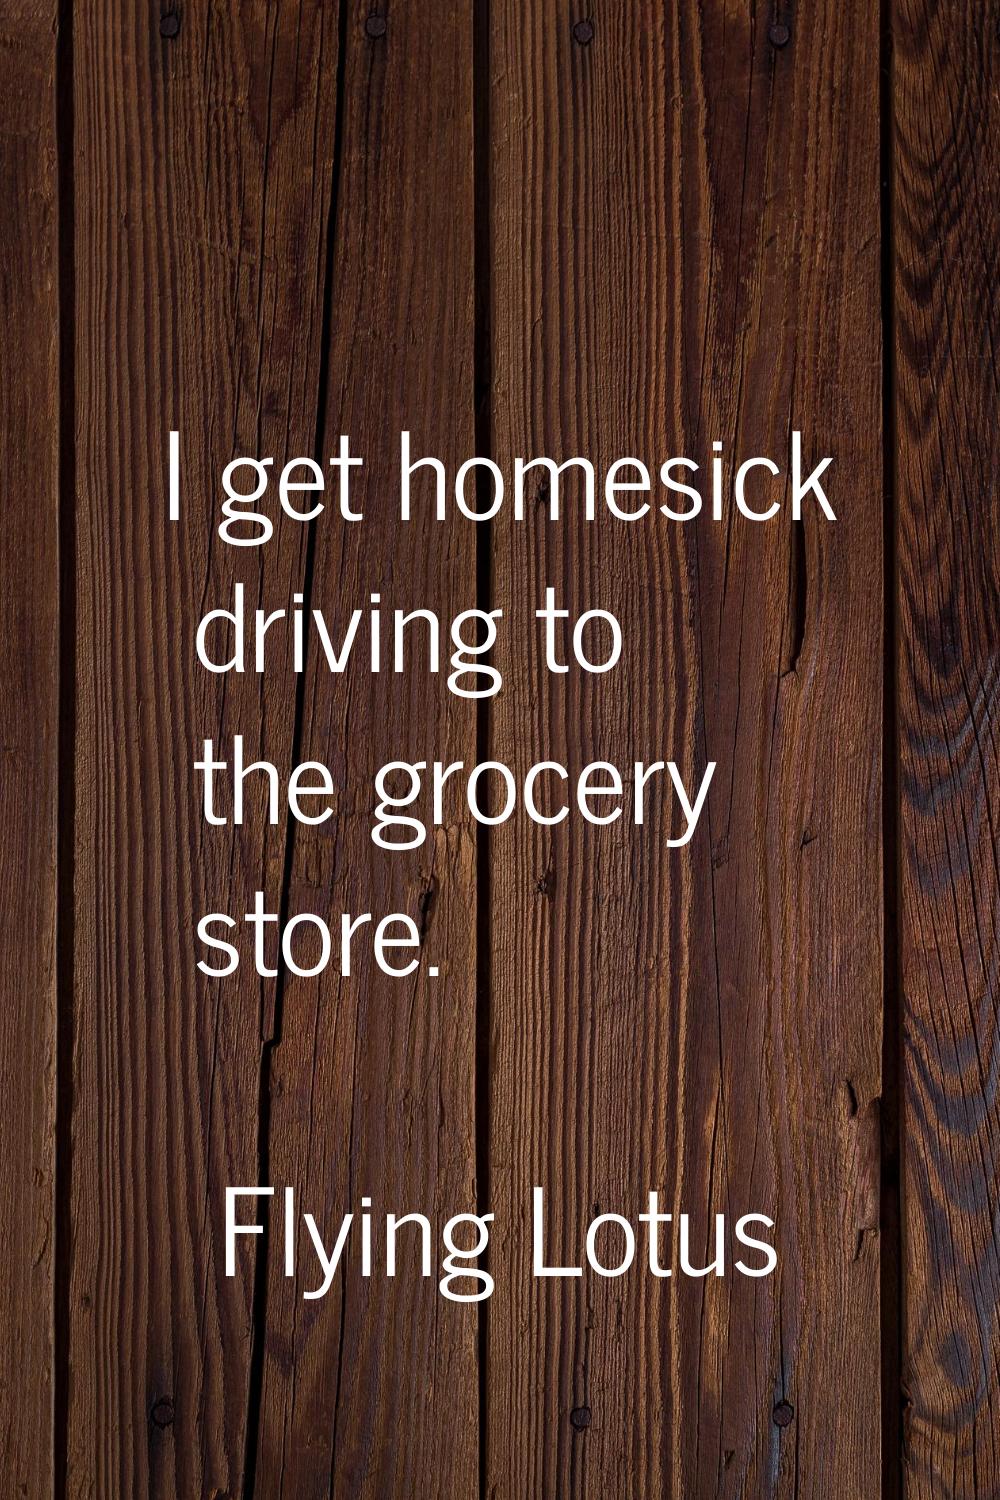 I get homesick driving to the grocery store.